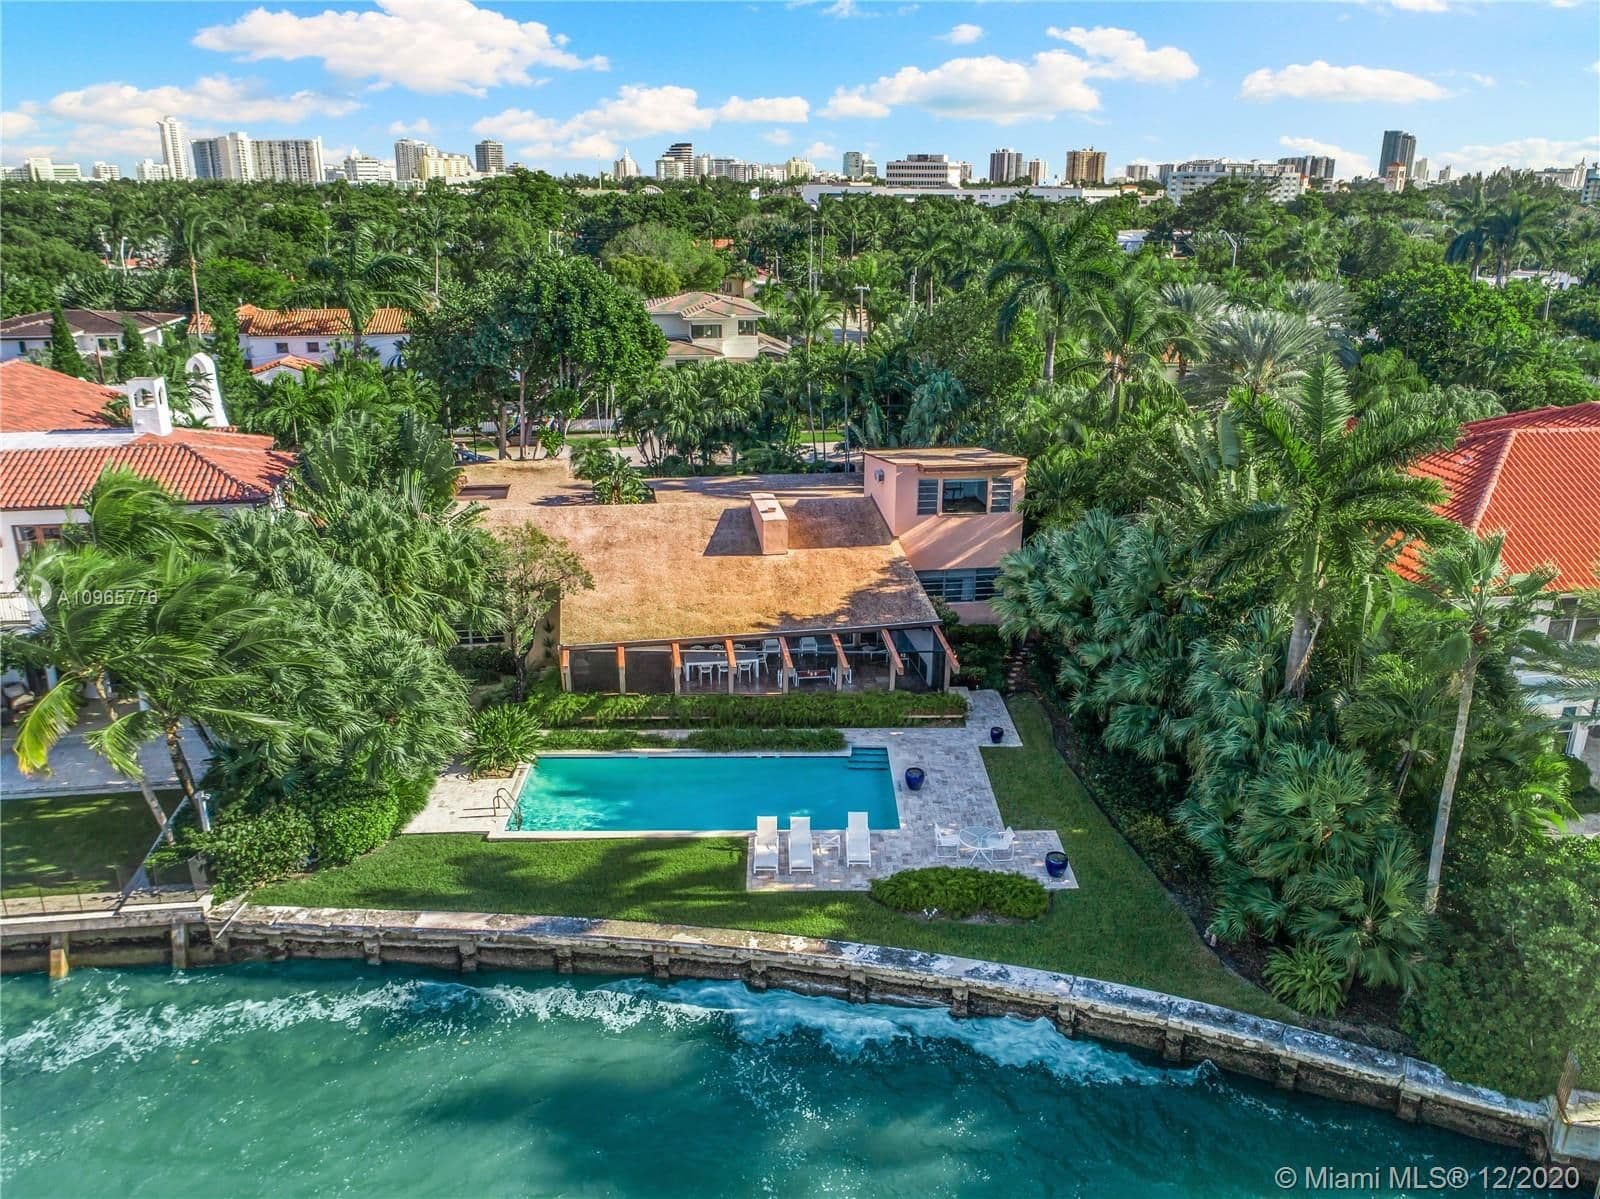 The lavish backyard of Cindy Crawford's new Miami Beach mansion boasts a pool that practically sits right on Biscayne Bay.